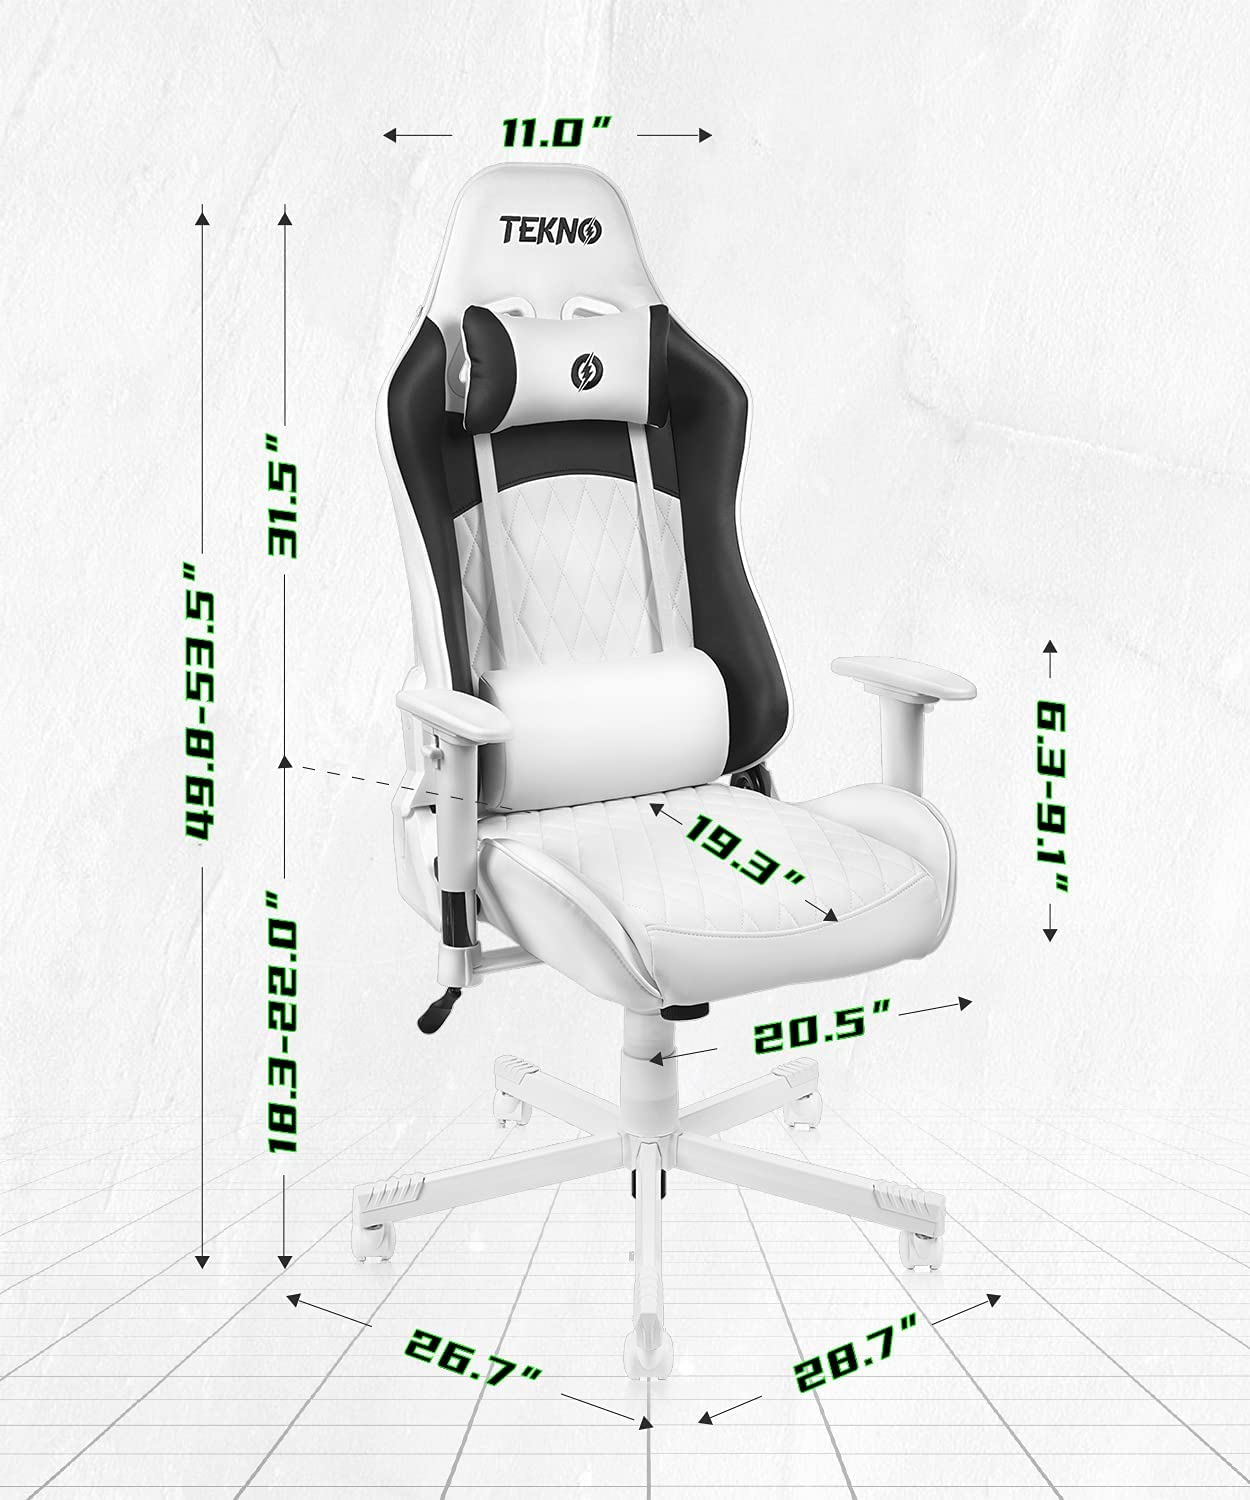 TEKNO Gaming Chairs for Adults, Ergonomic Swivel Gaming Chair with Hea –  FURNGO